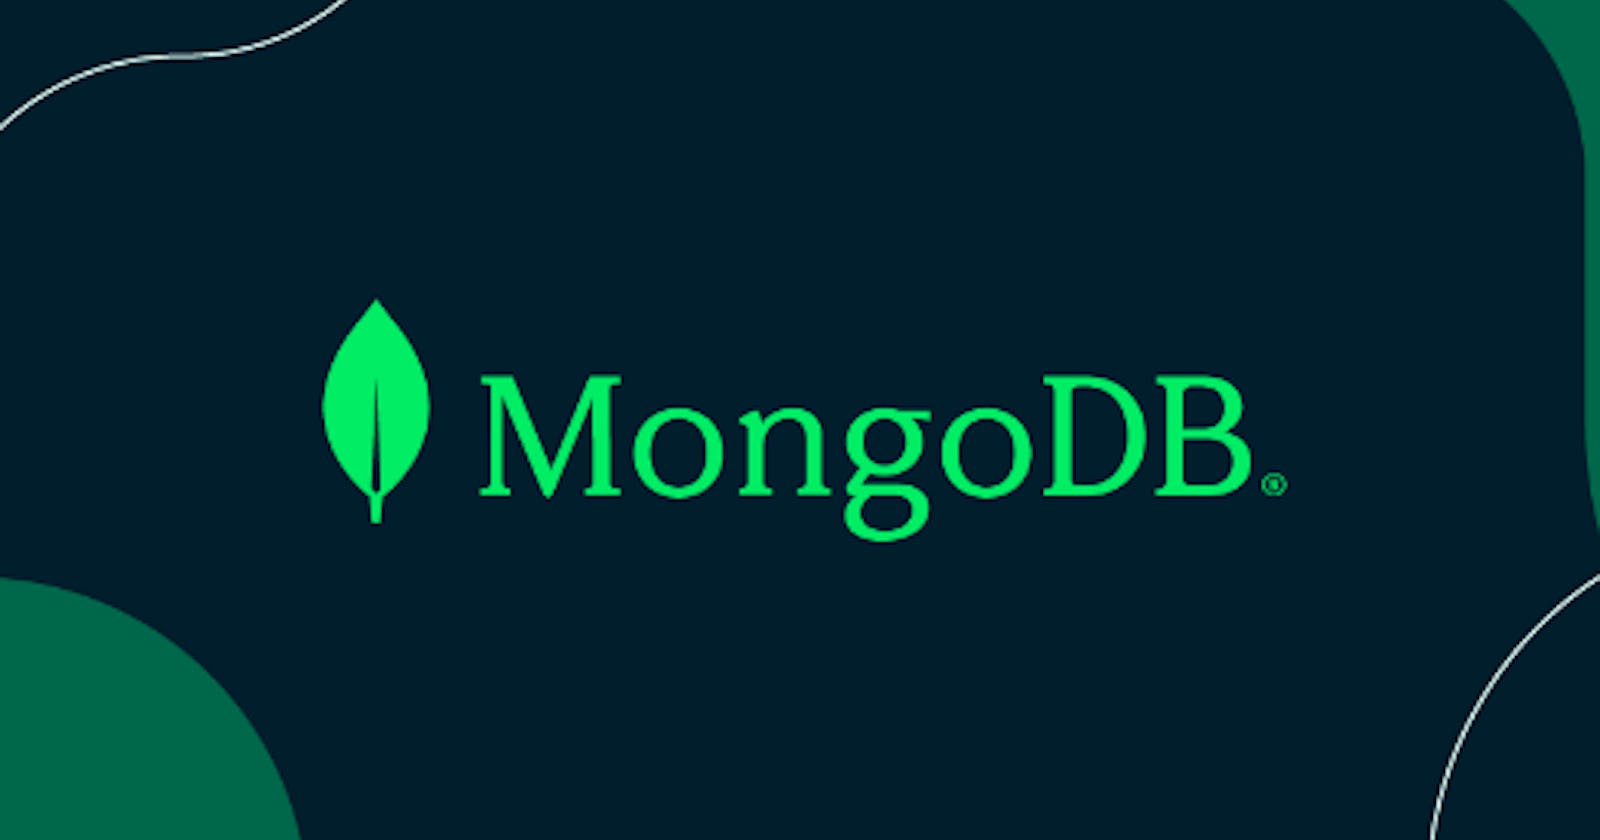 Connecting Node.js with MongoDB using Mongoose